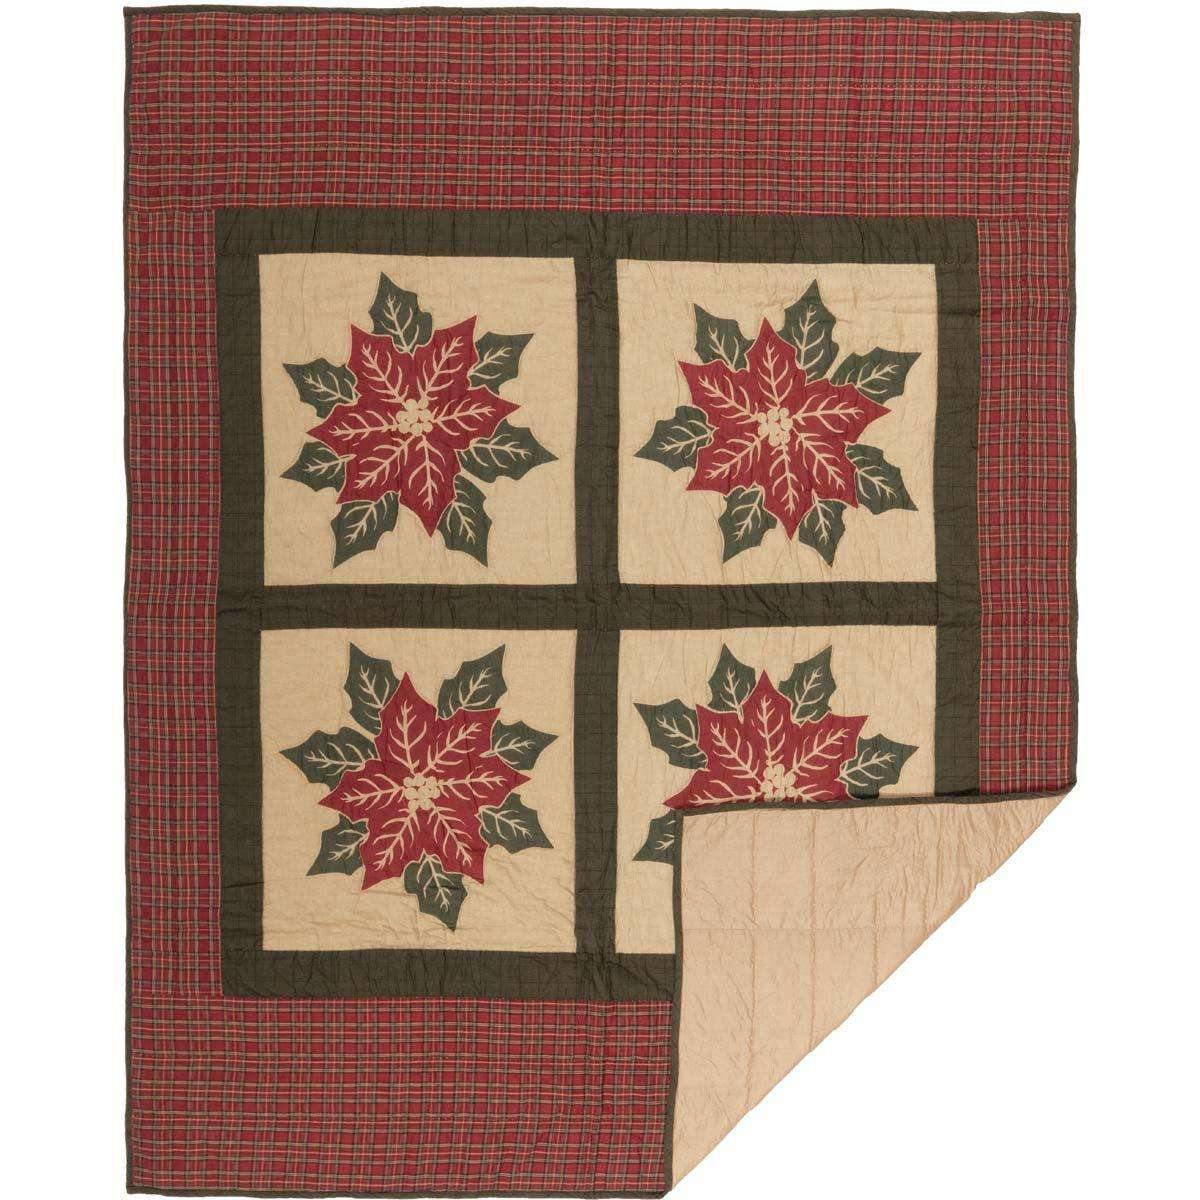 National Quilt Museum Poinsettia Block Quilted Throw 60x50